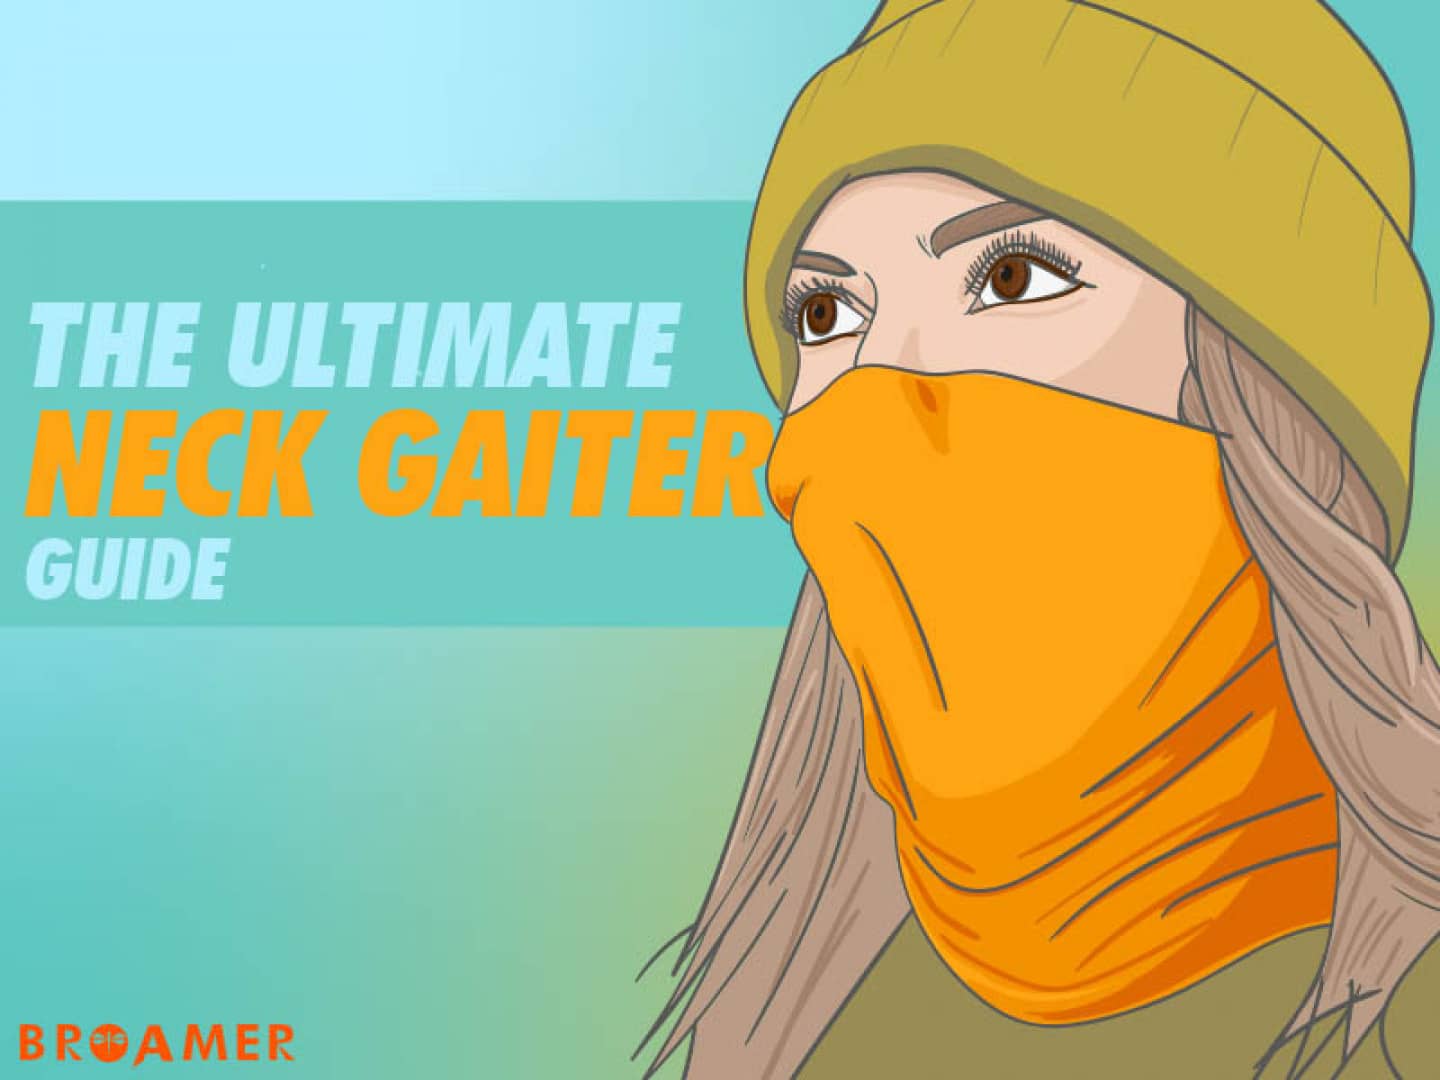 The ultimate neck gaiter guide